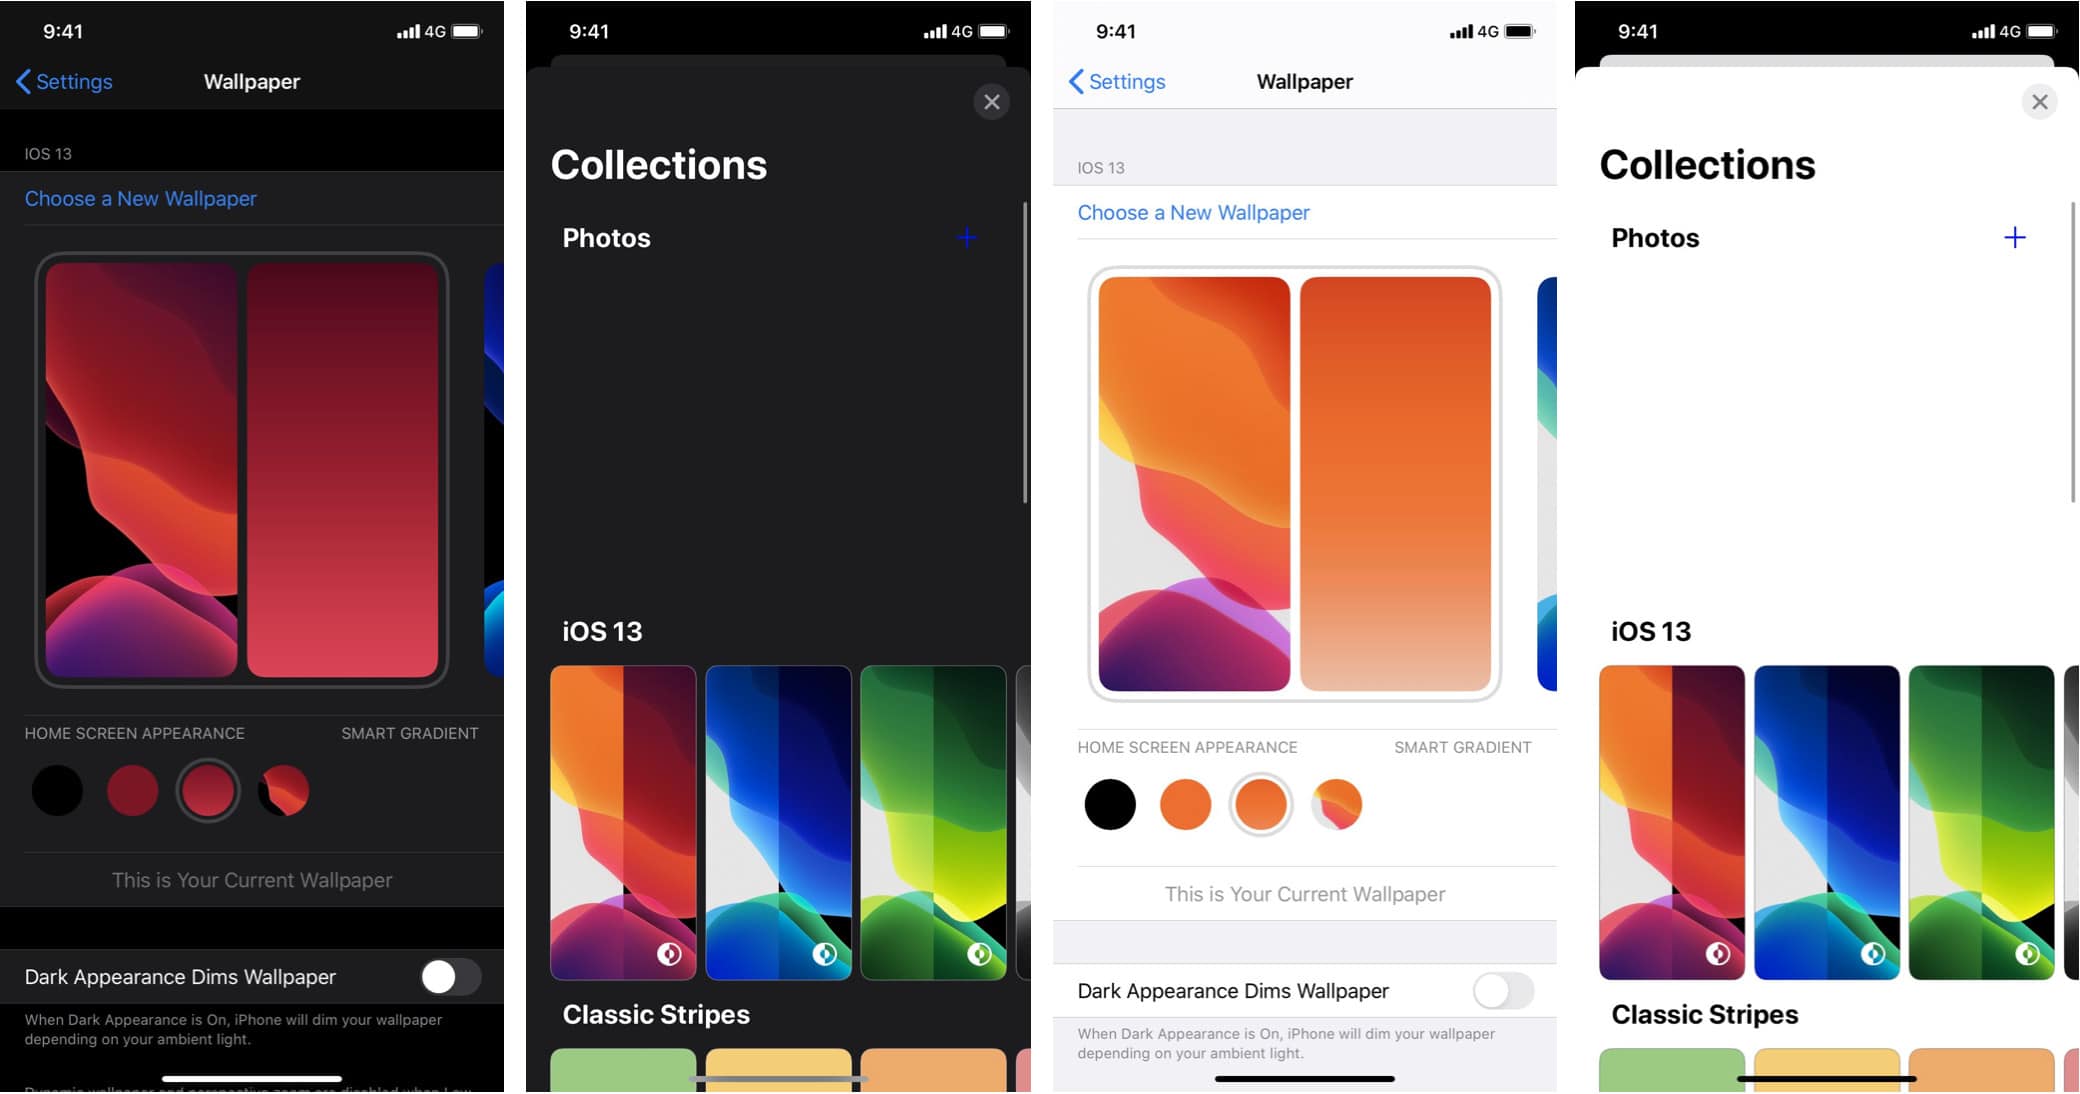 Ios 14 Could Bring New Wallpaper Settings, Home Screen Widgets